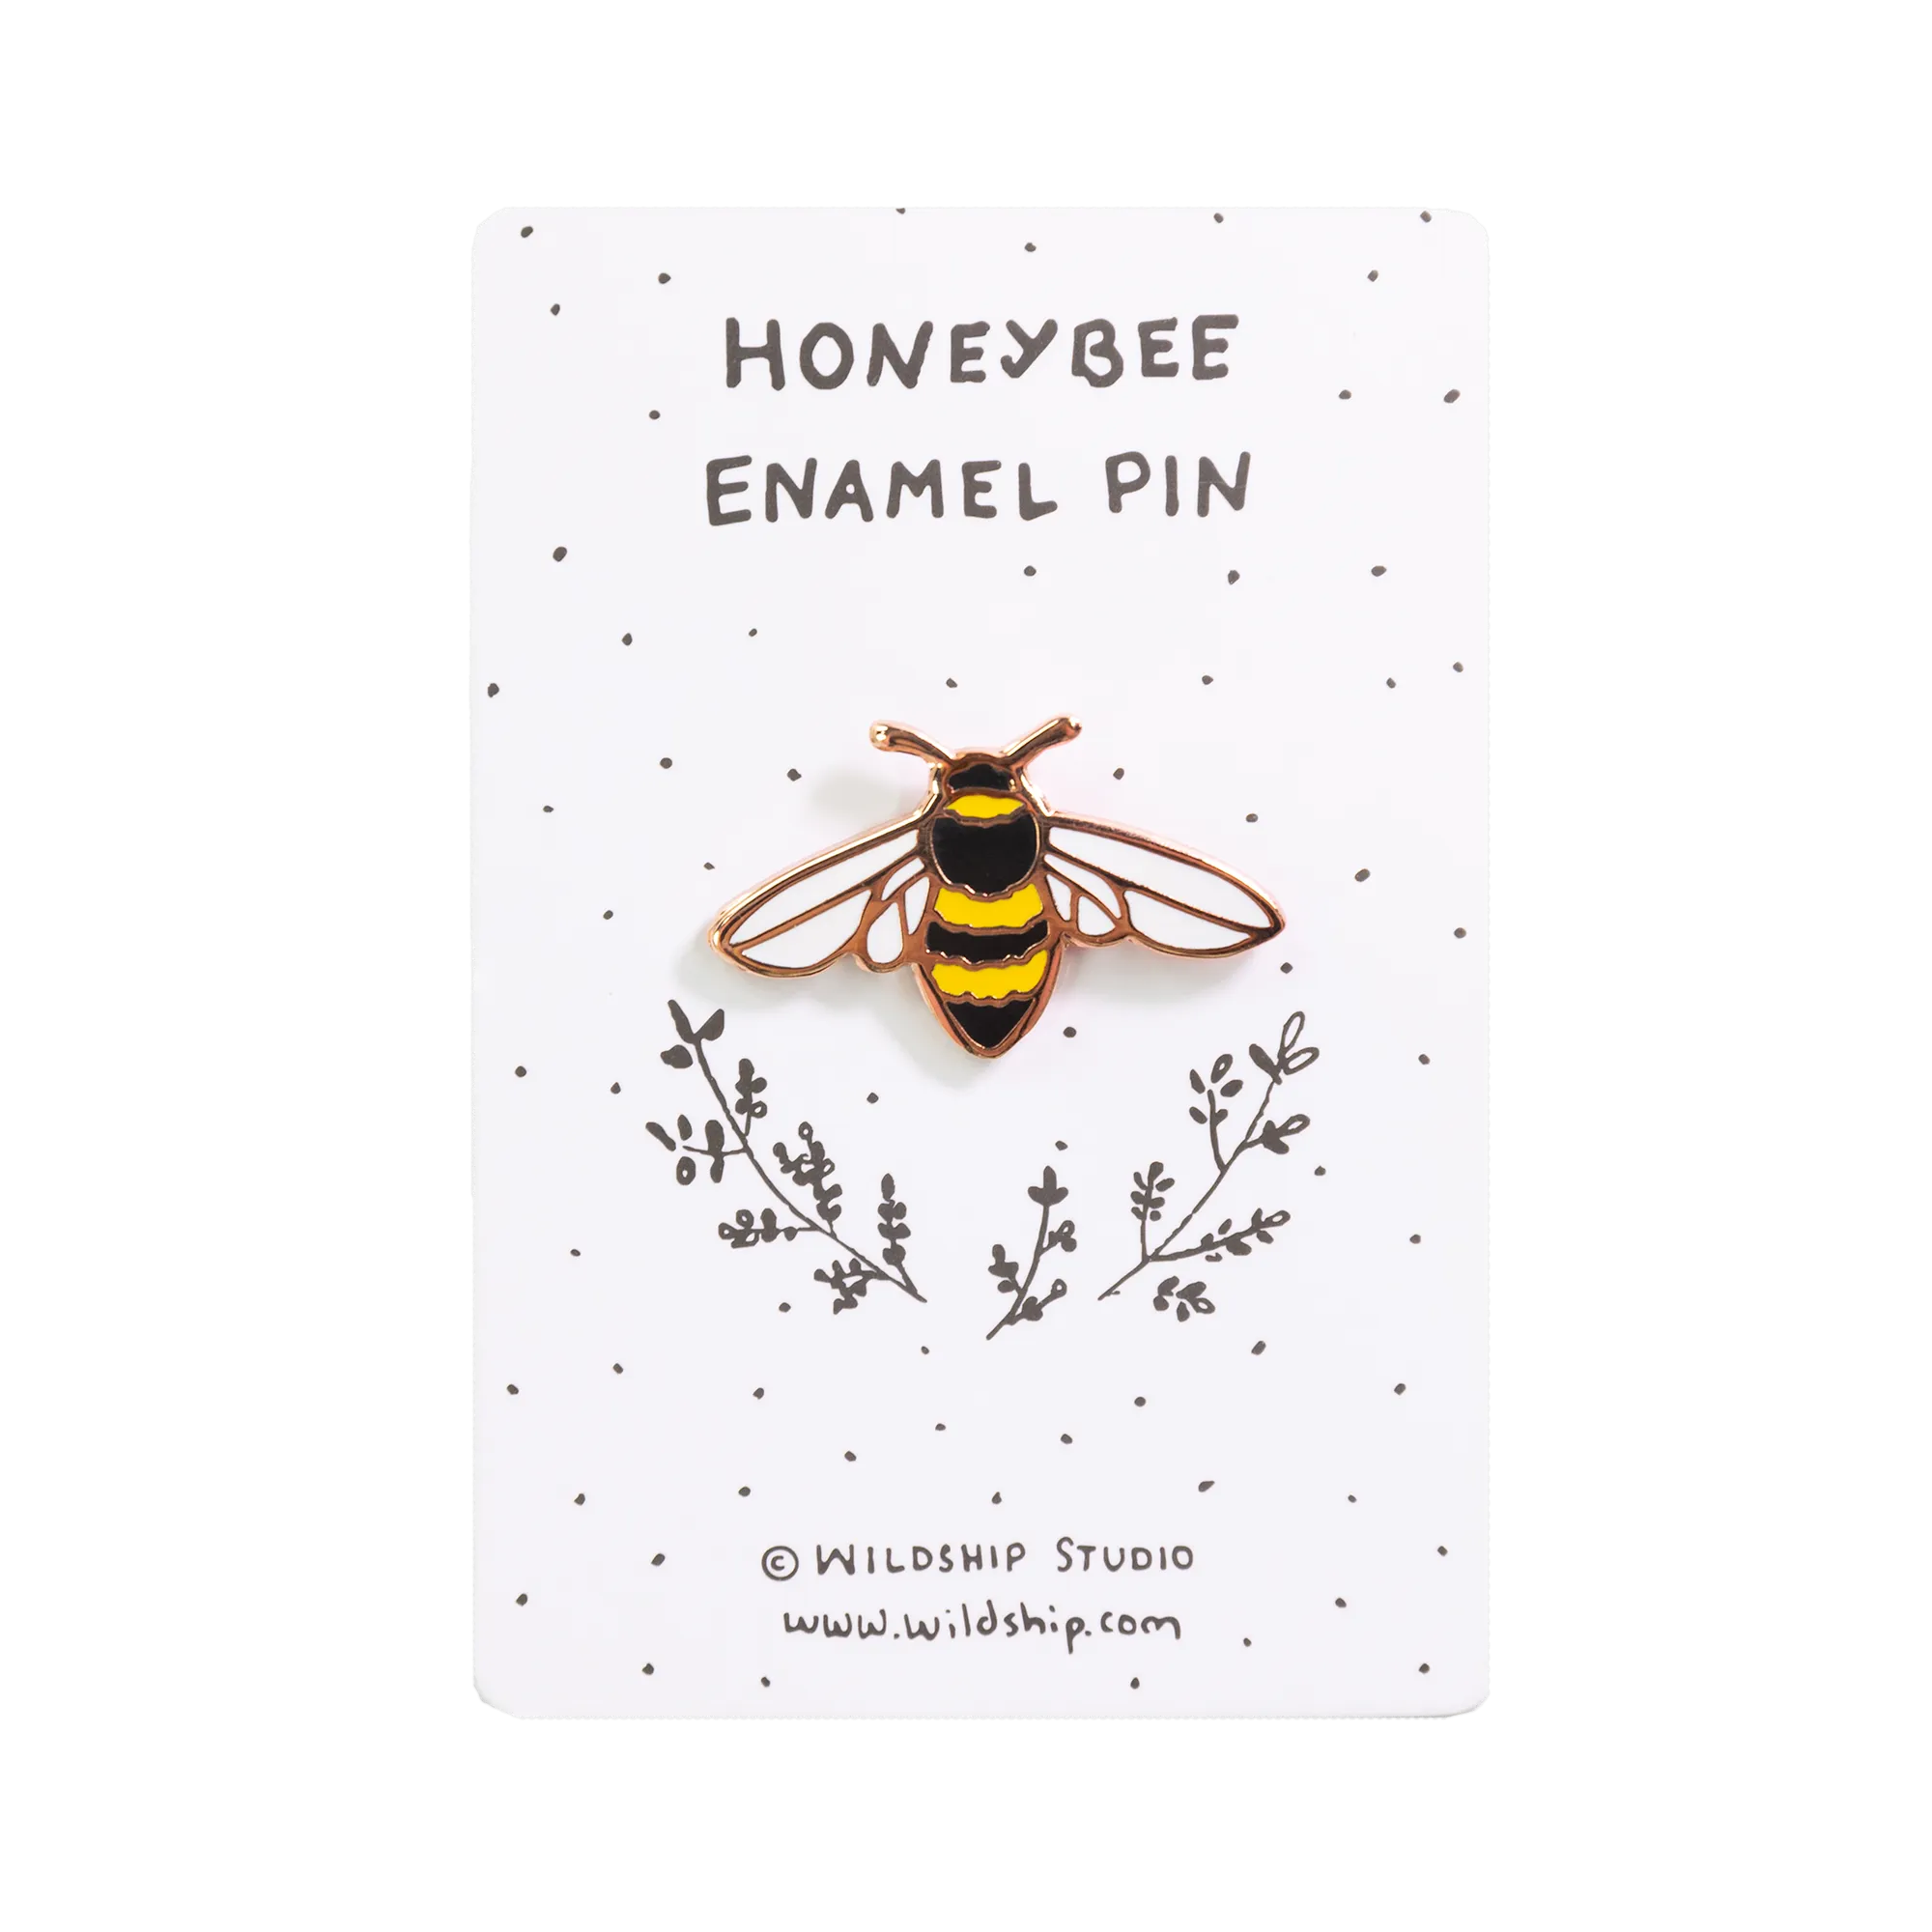 Visit the Honeybee Enamel Pin Product Page